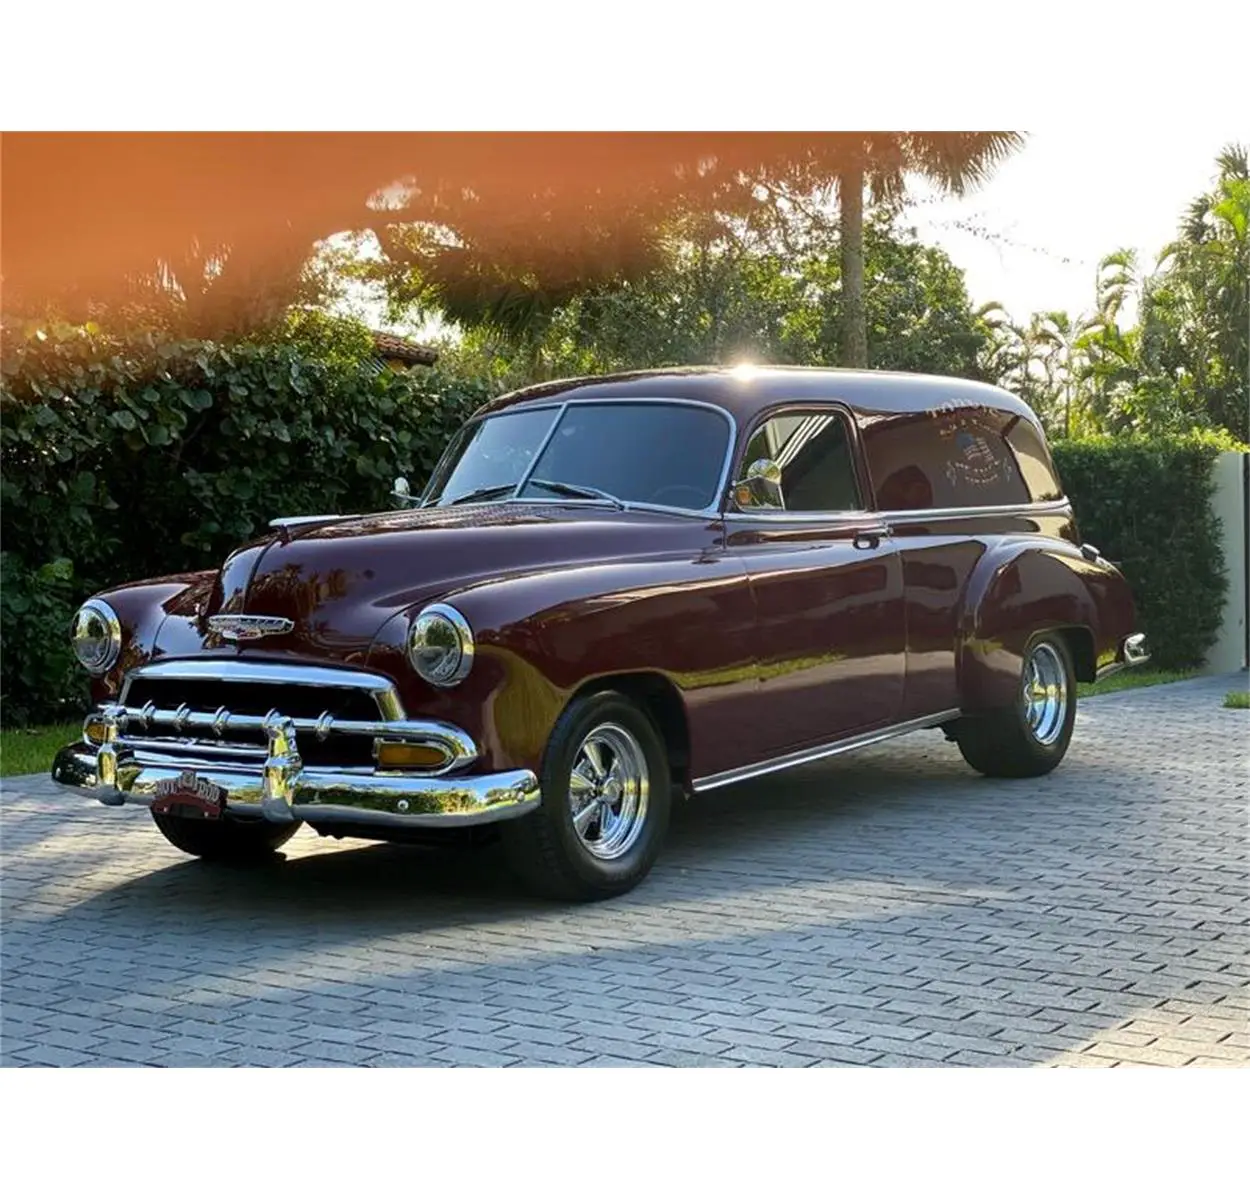 1949 to 1952 Chevrolet for Sale on ClassicCars.com